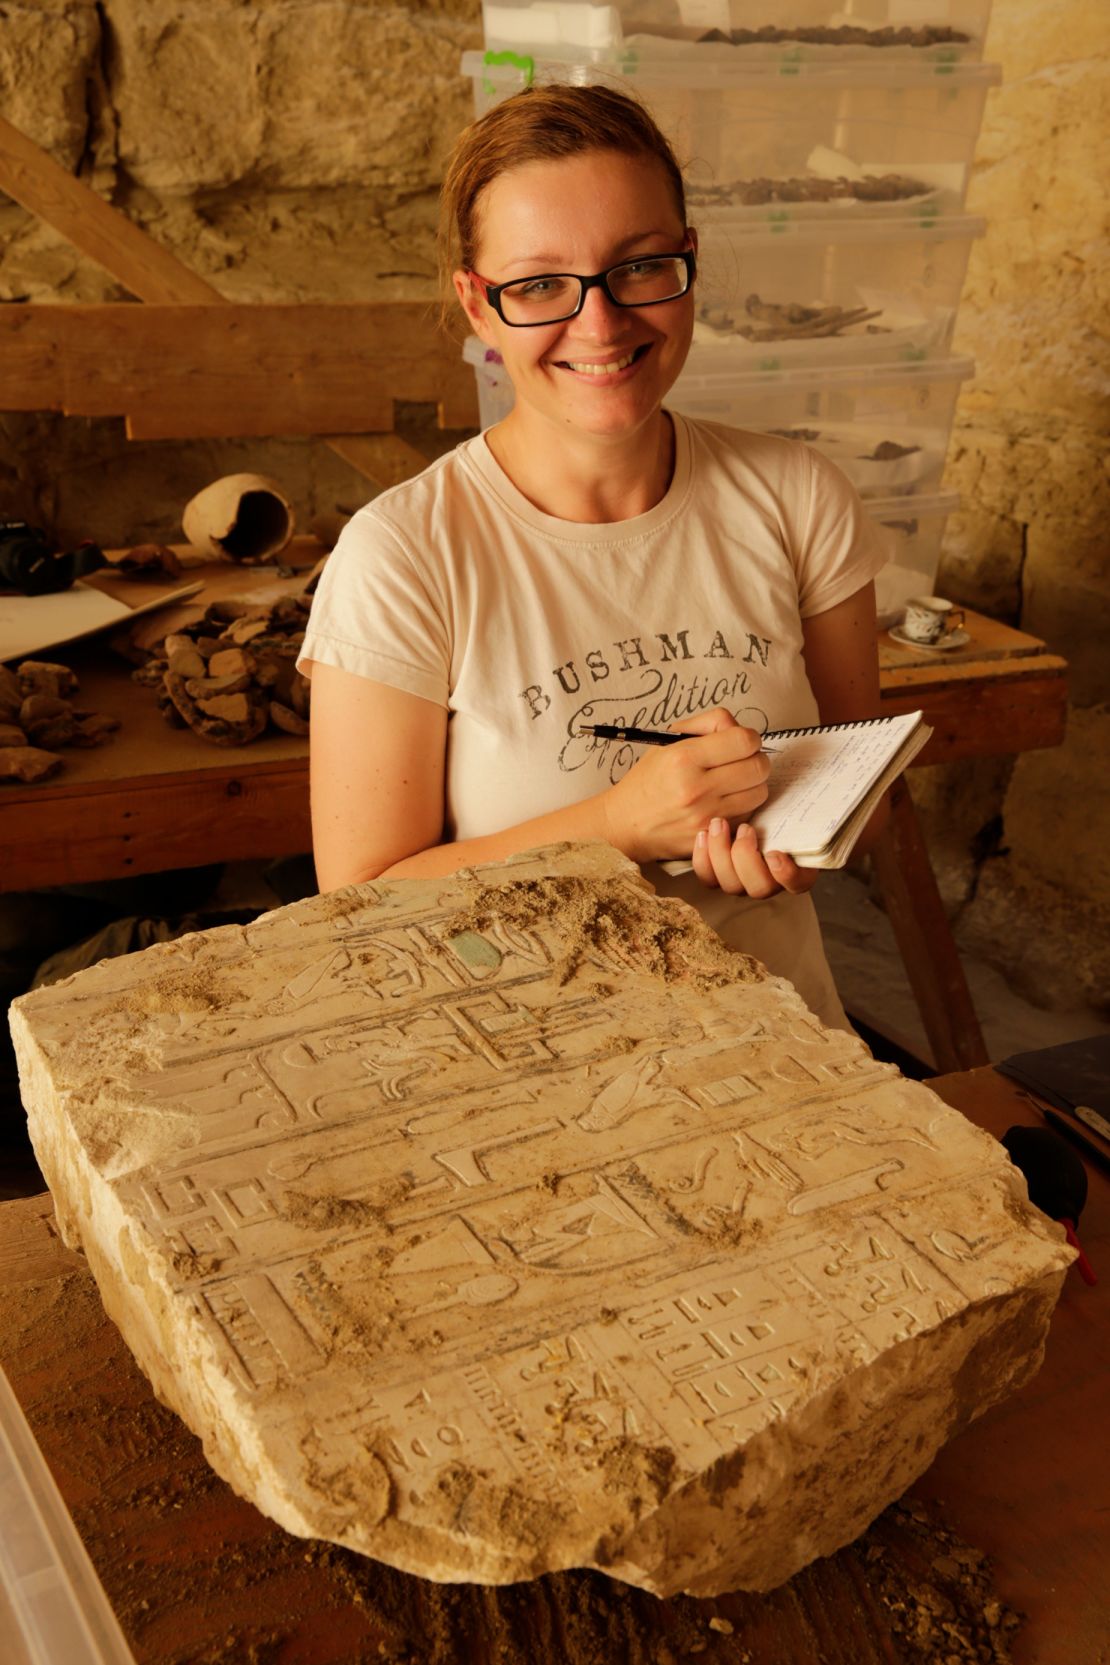 Egyptologist Veronika Dulíková appears on site at Abusir documenting a hieroglyphic inscription from the tomb of the official Idu.